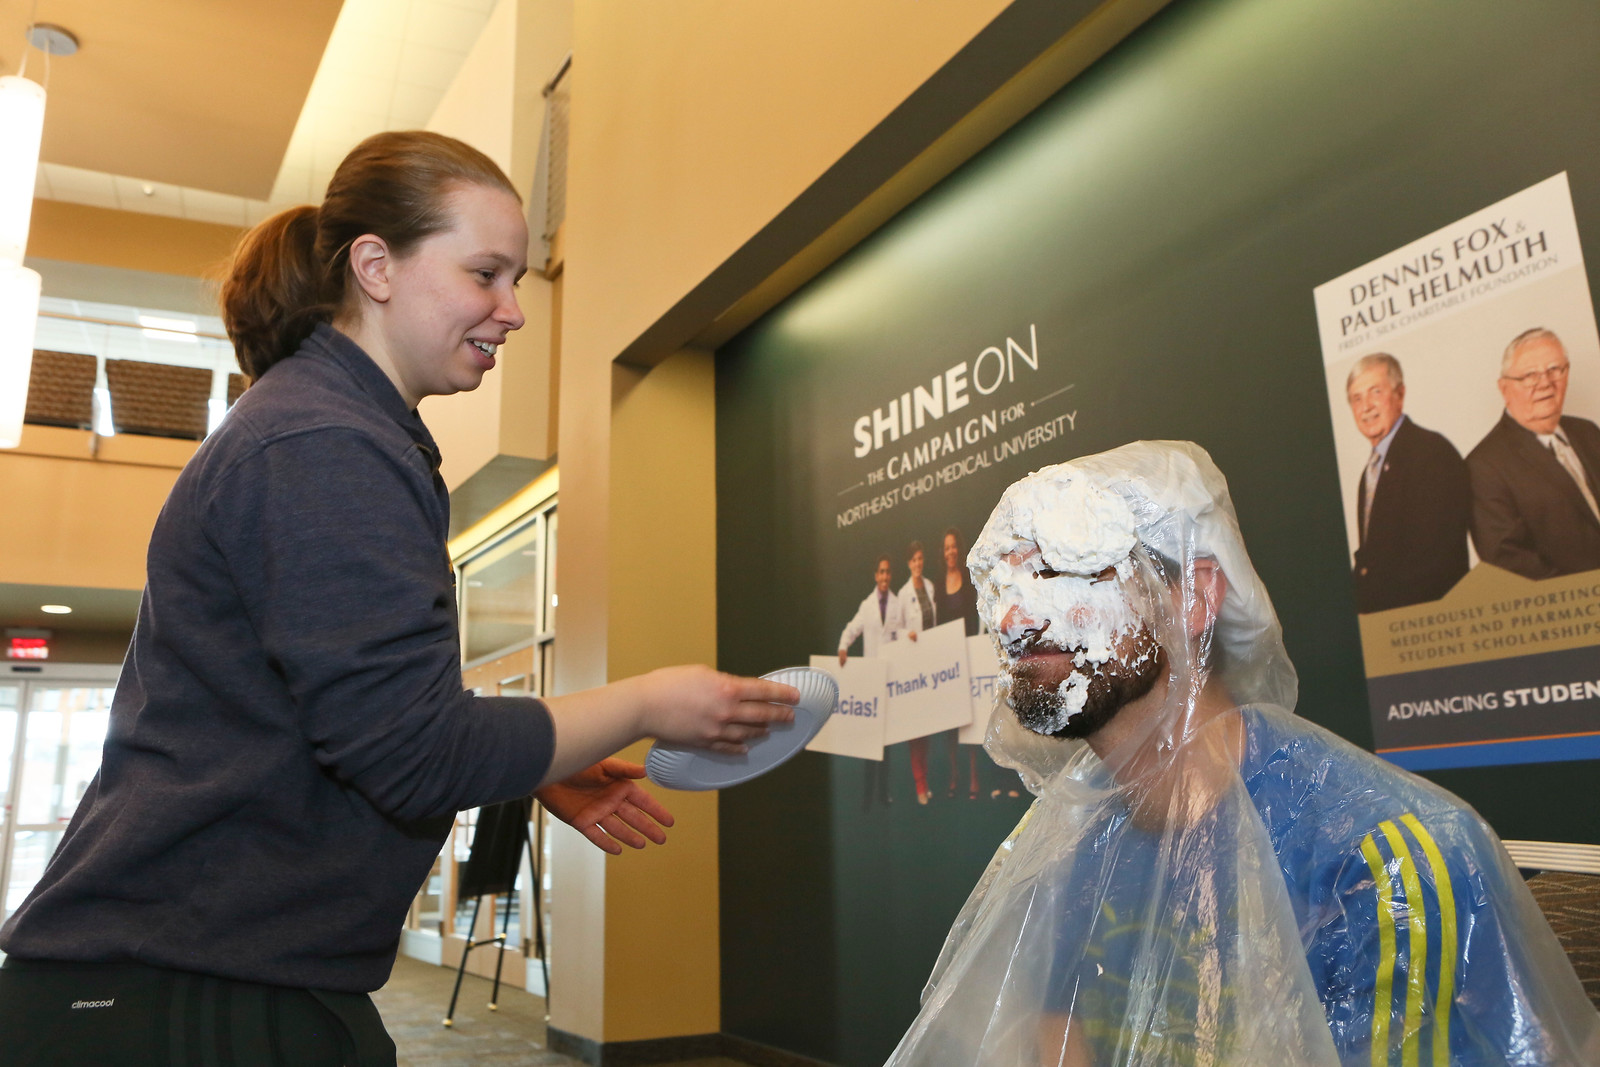 Professor Jesse Young being pied by a student